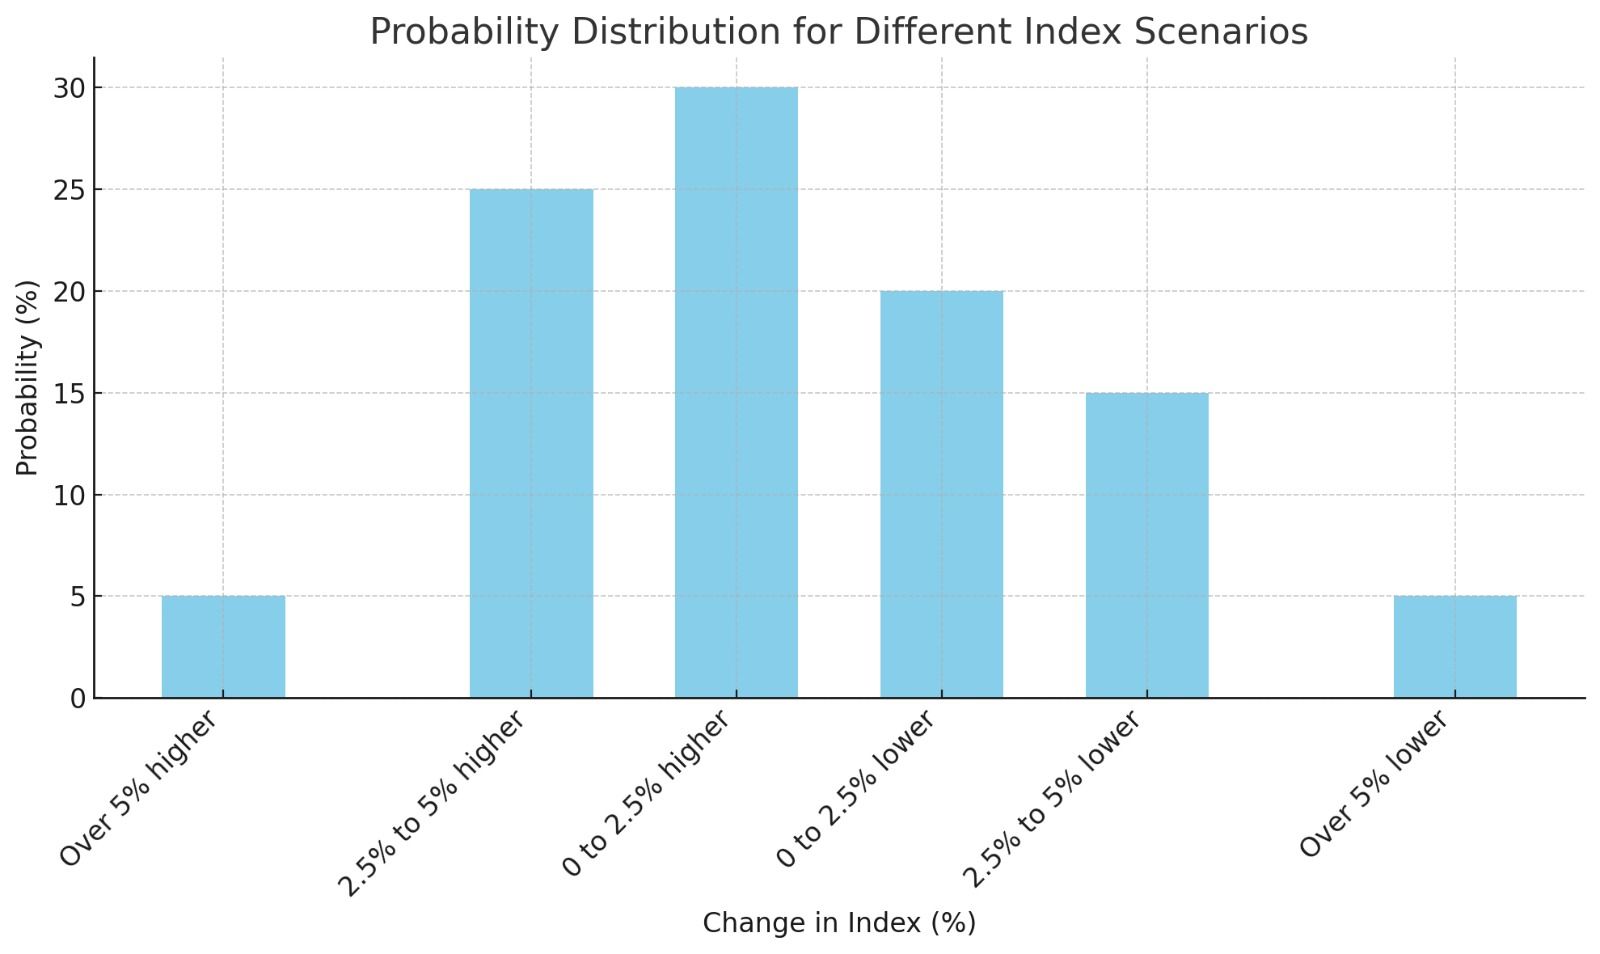 Using the S&P 500's index value of 4366 on August 18th, 2023, as the starting point, GPT-4 created a probability distribution for its performance as of December 31st, 2023.